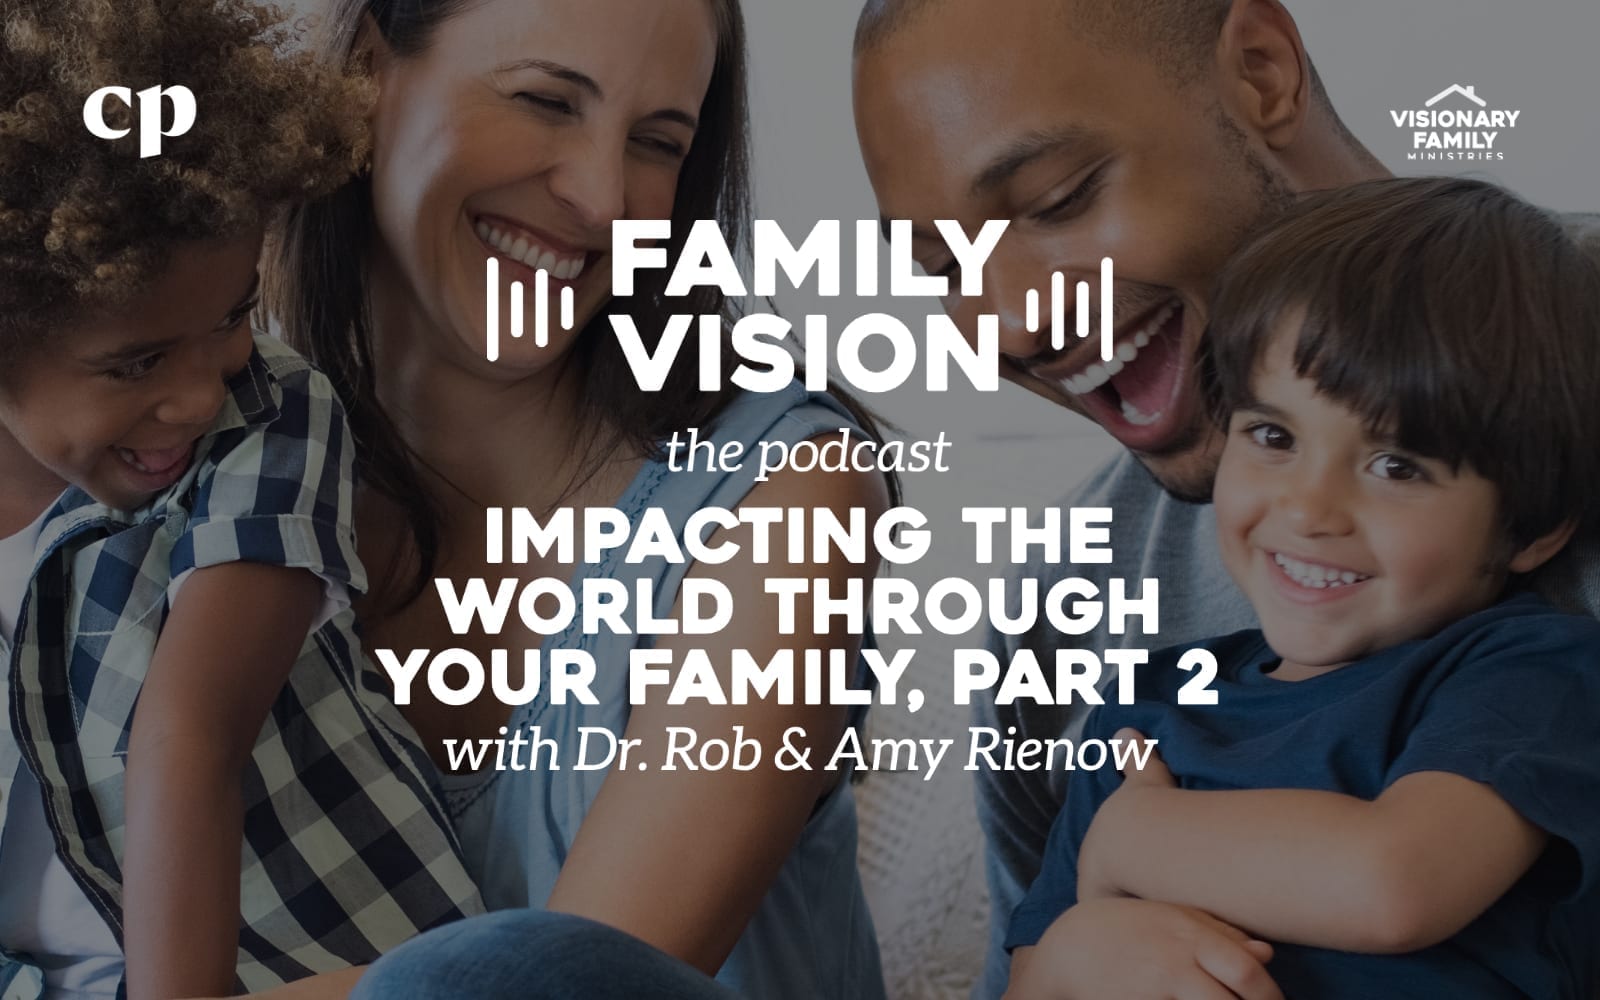 Impacting the World Through Your Family, Part 2